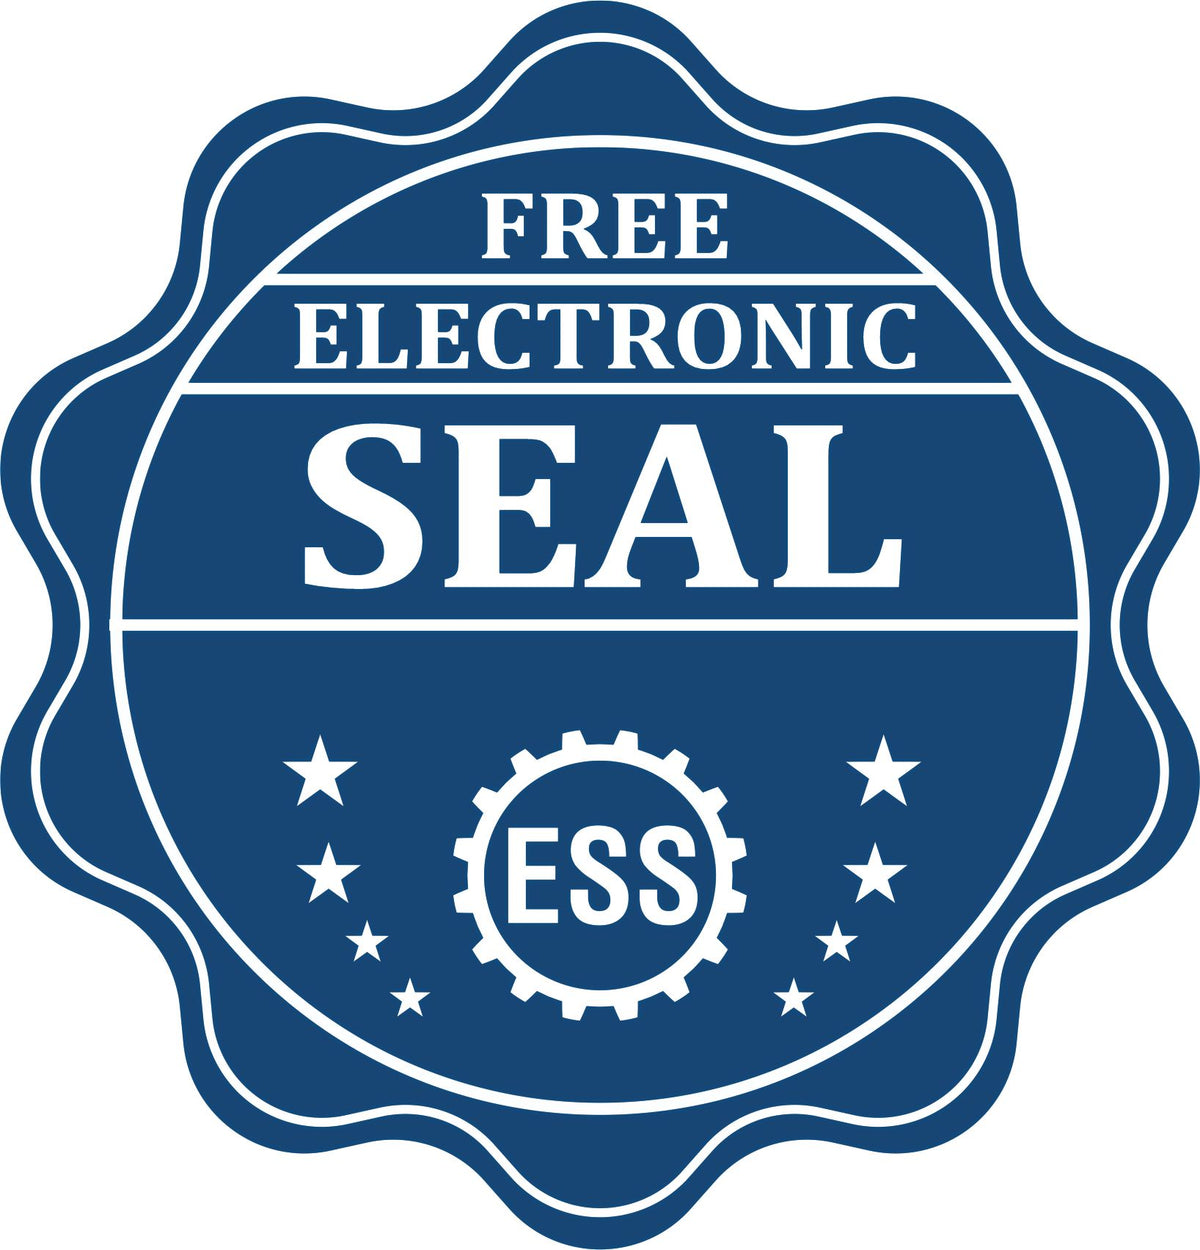 A badge showing a free electronic seal for the Heavy Duty Cast Iron Louisiana Geologist Seal Embosser with stars and the ESS gear on the emblem.